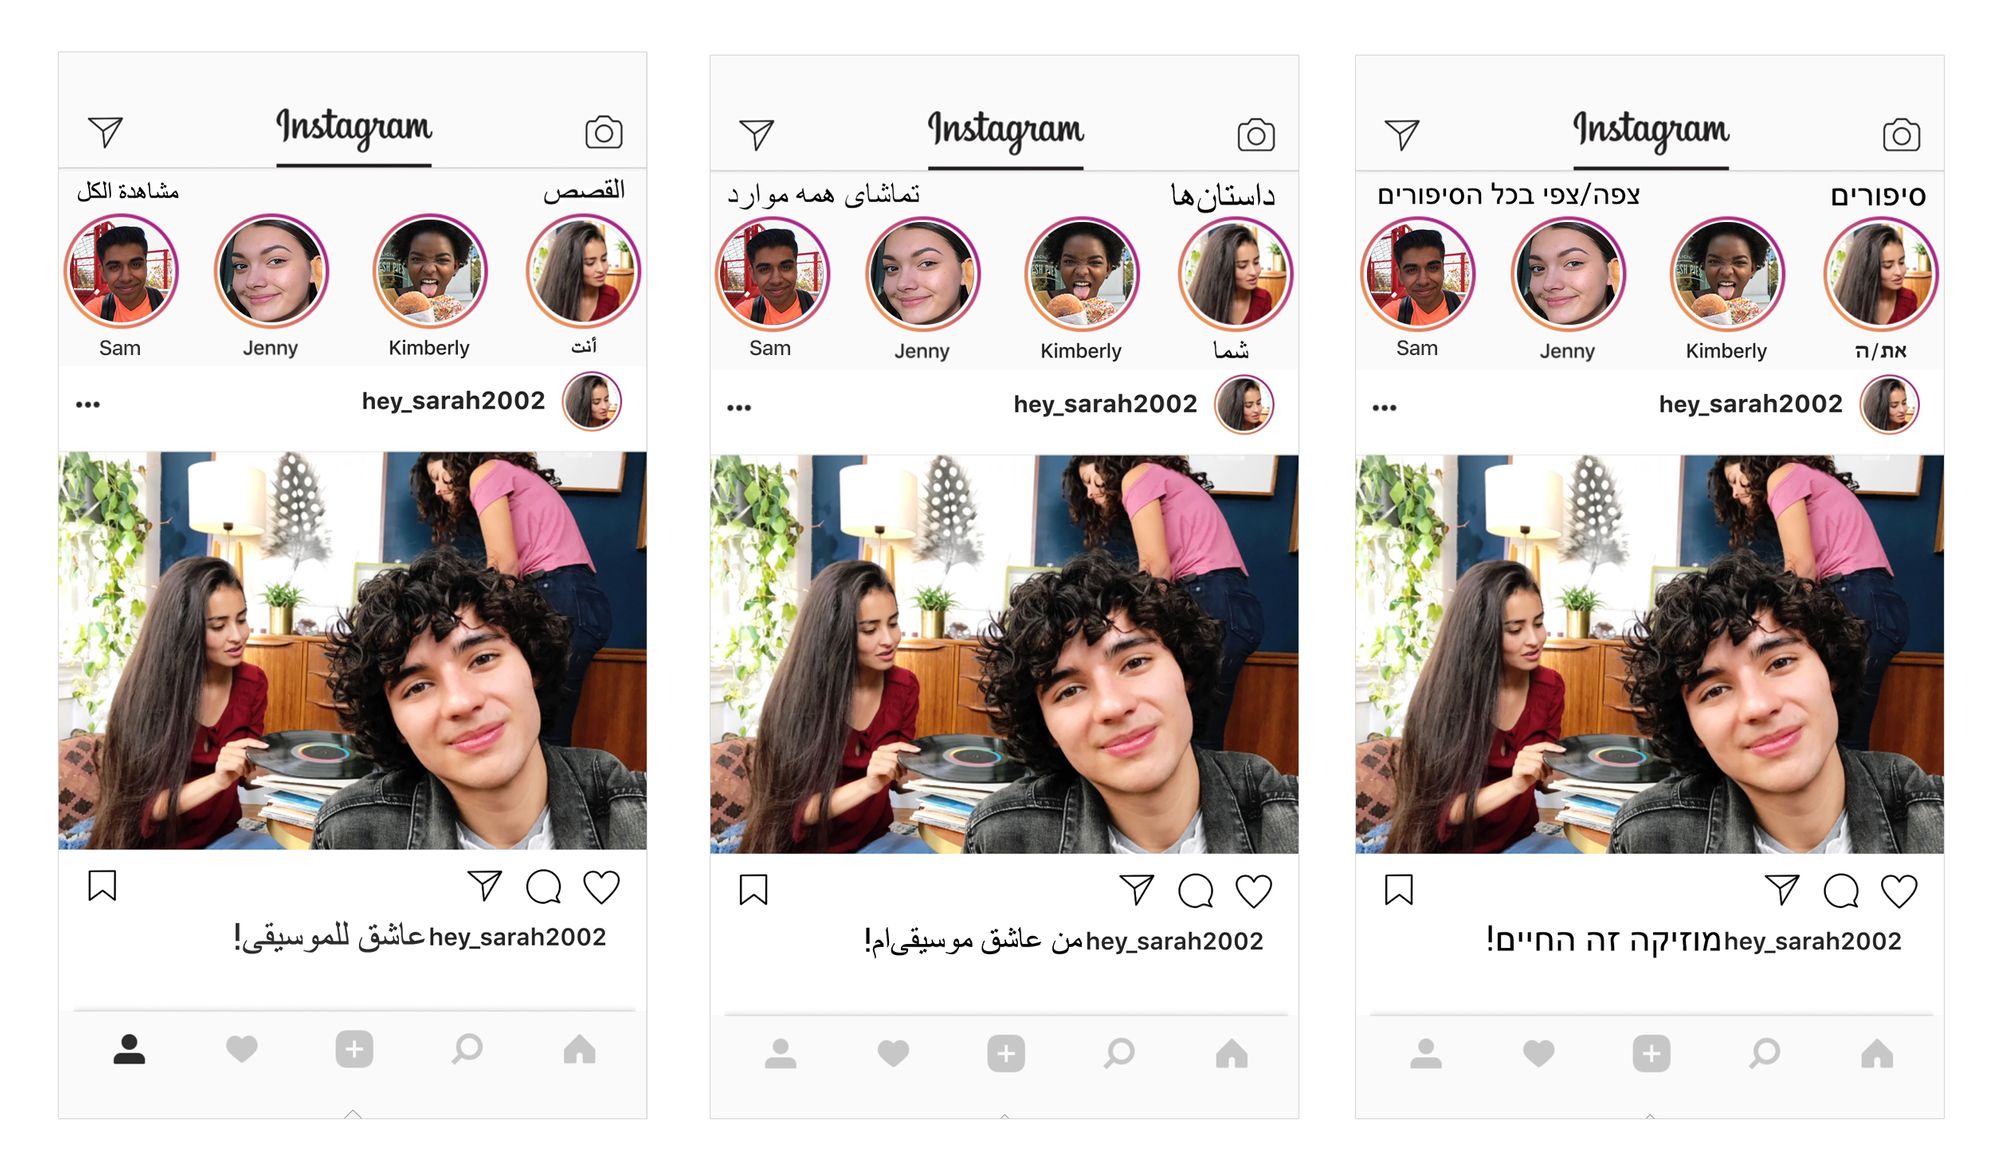 Arabic, Hebrew and Farsi translations for Instagram. Images from instagram-press.com